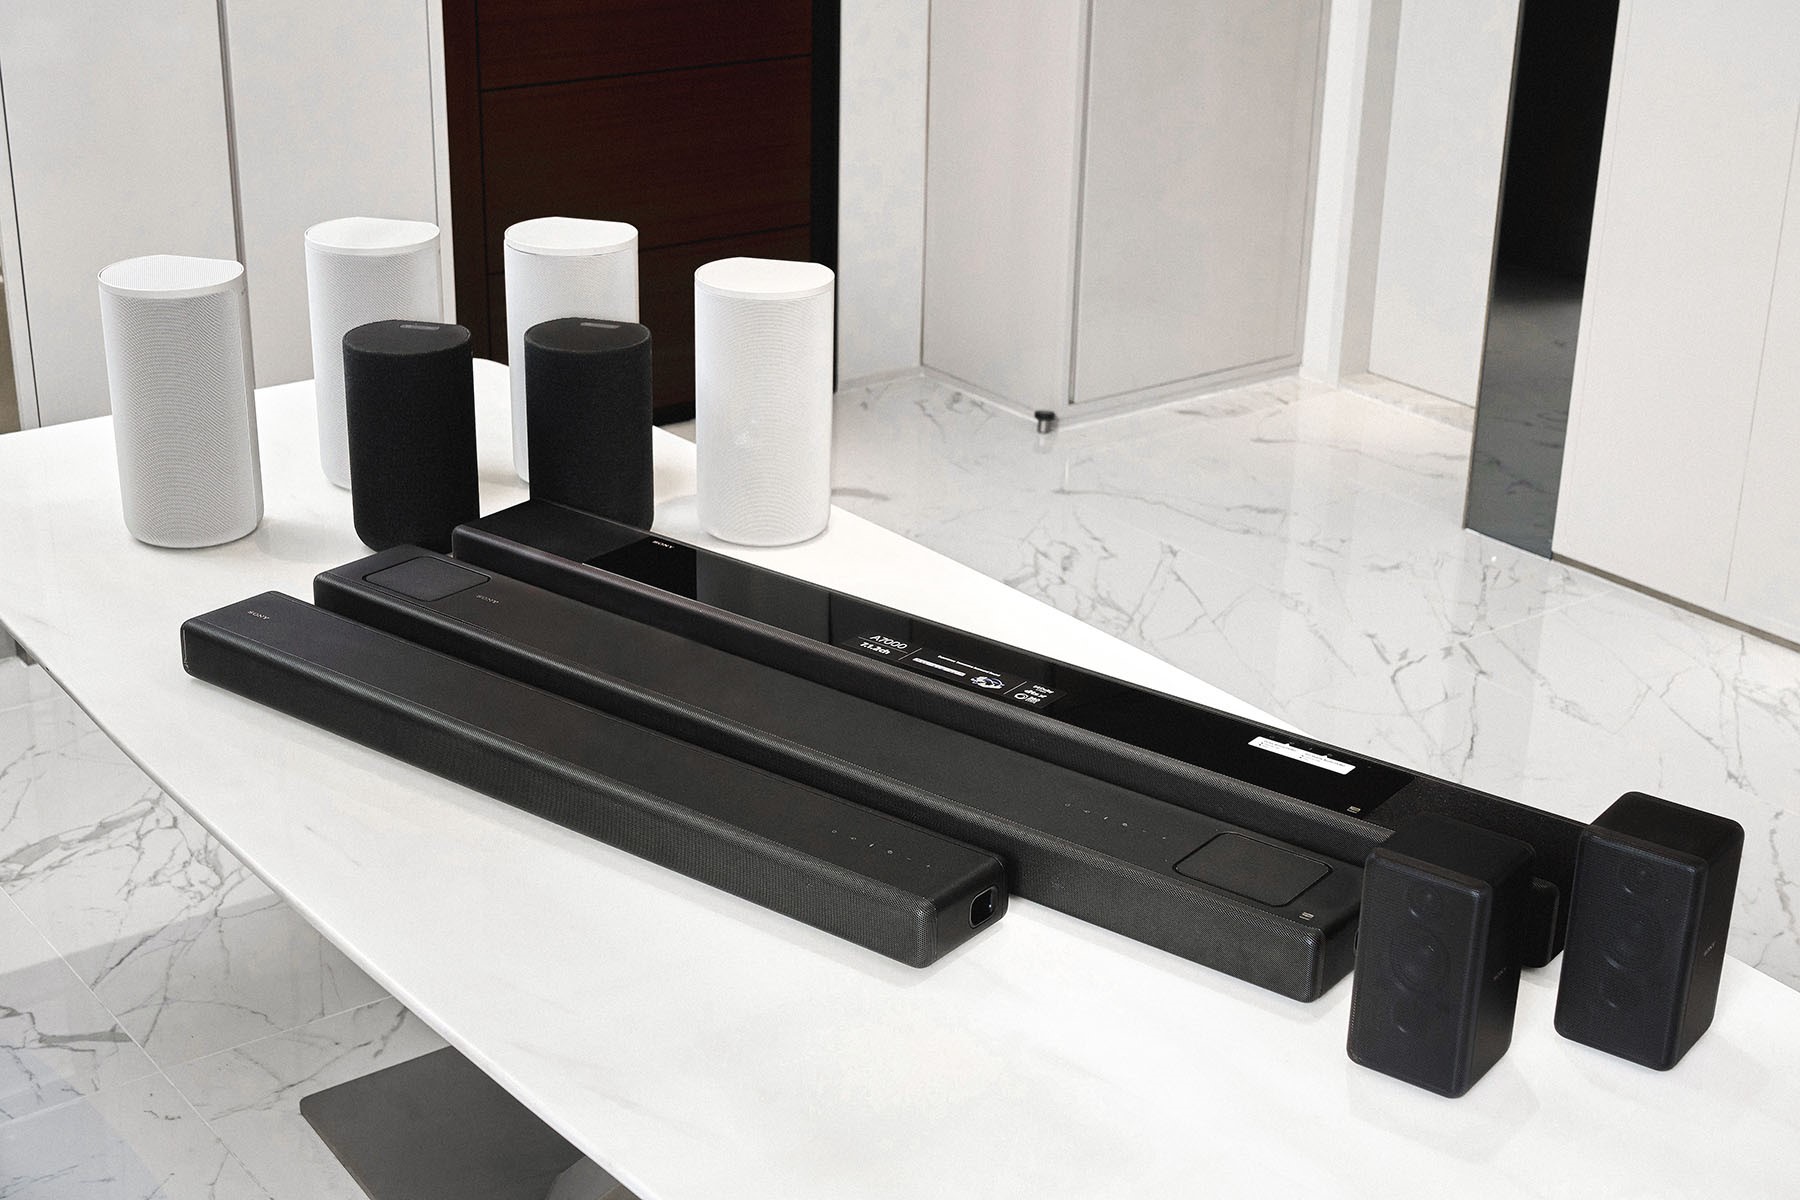 Sony single-piece Soundbar family HT-A3000, HT-A5000, HT-A7000 can be combined with rear surround SA-RS5 and SA-RS3S to realize various combinations. If you want to be more advanced, you can also choose the separate HT-A9 surround sound effect, and the product line is complete and diverse.